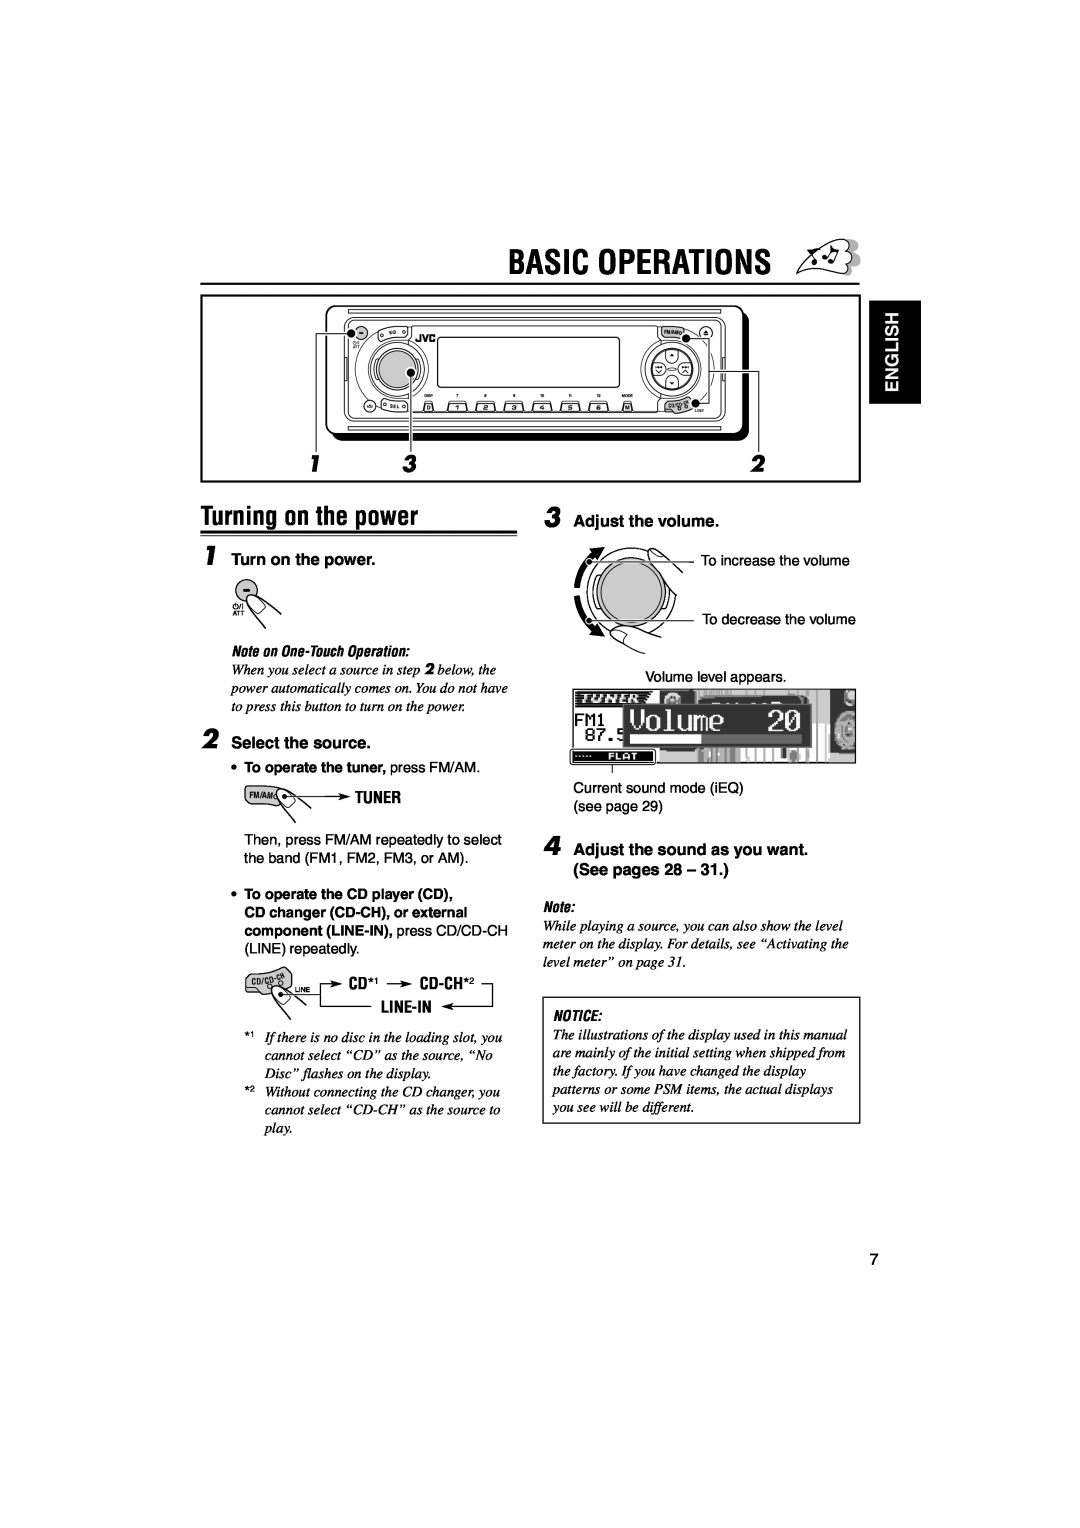 JVC KD-LH3105 manual Basic Operations, Turning on the power, English, CD-CH*2, Line-In, Note on One-TouchOperation, CD*1 